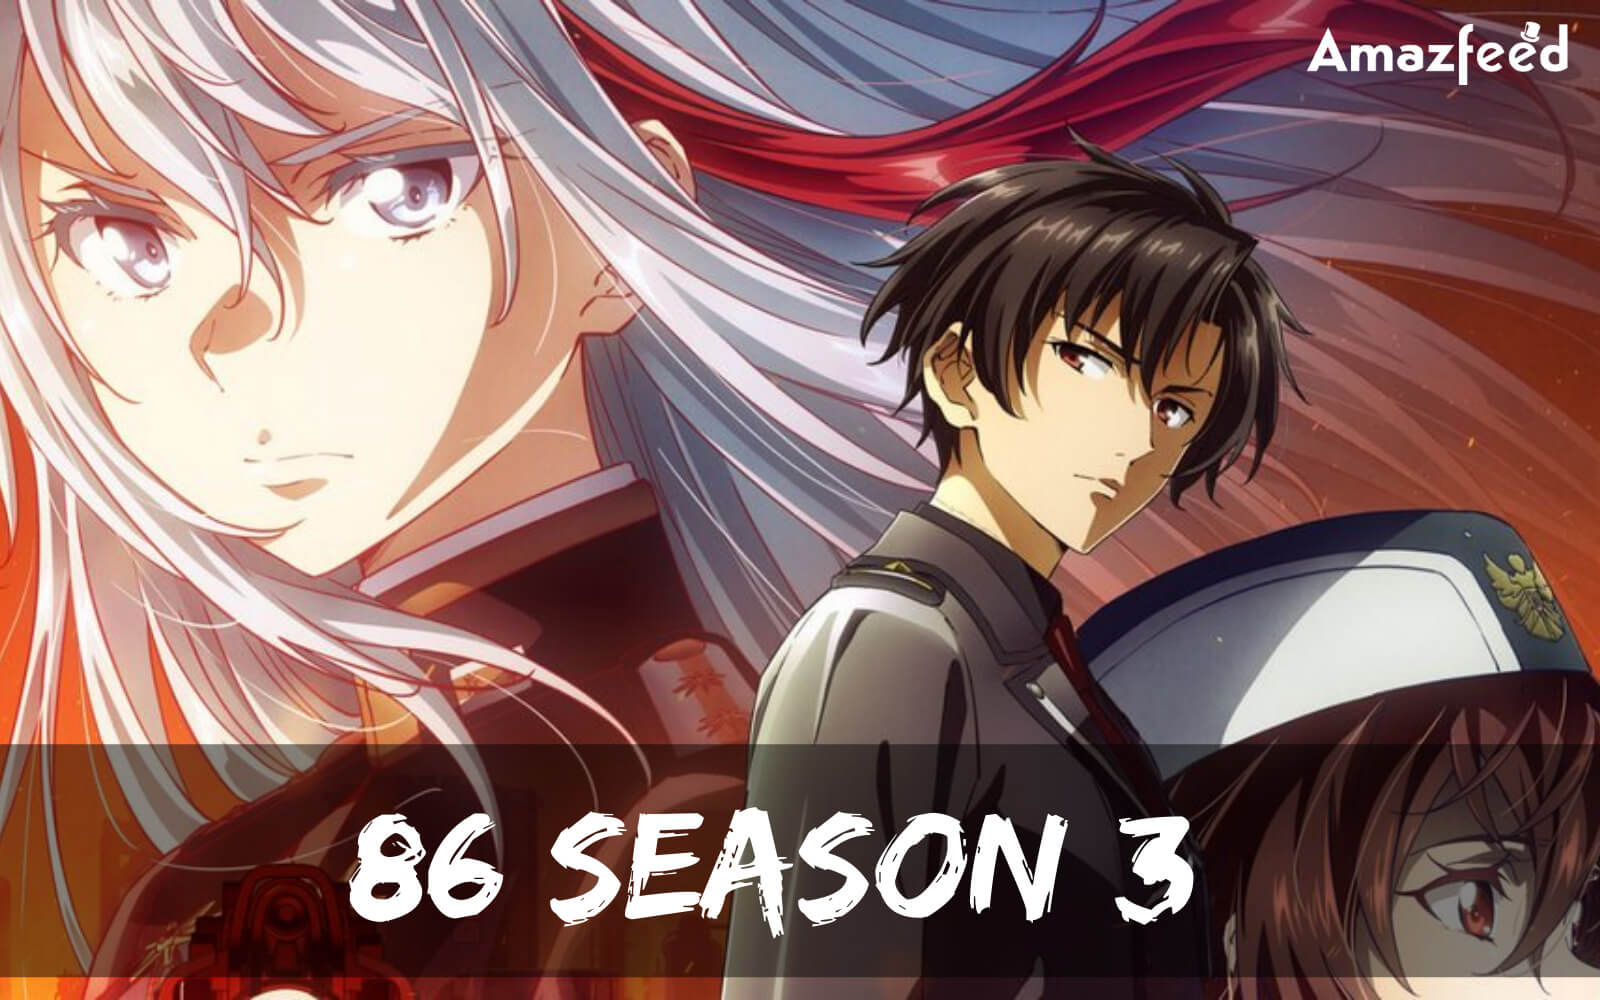 When is 86 Season 3 Coming Out (Release Date)